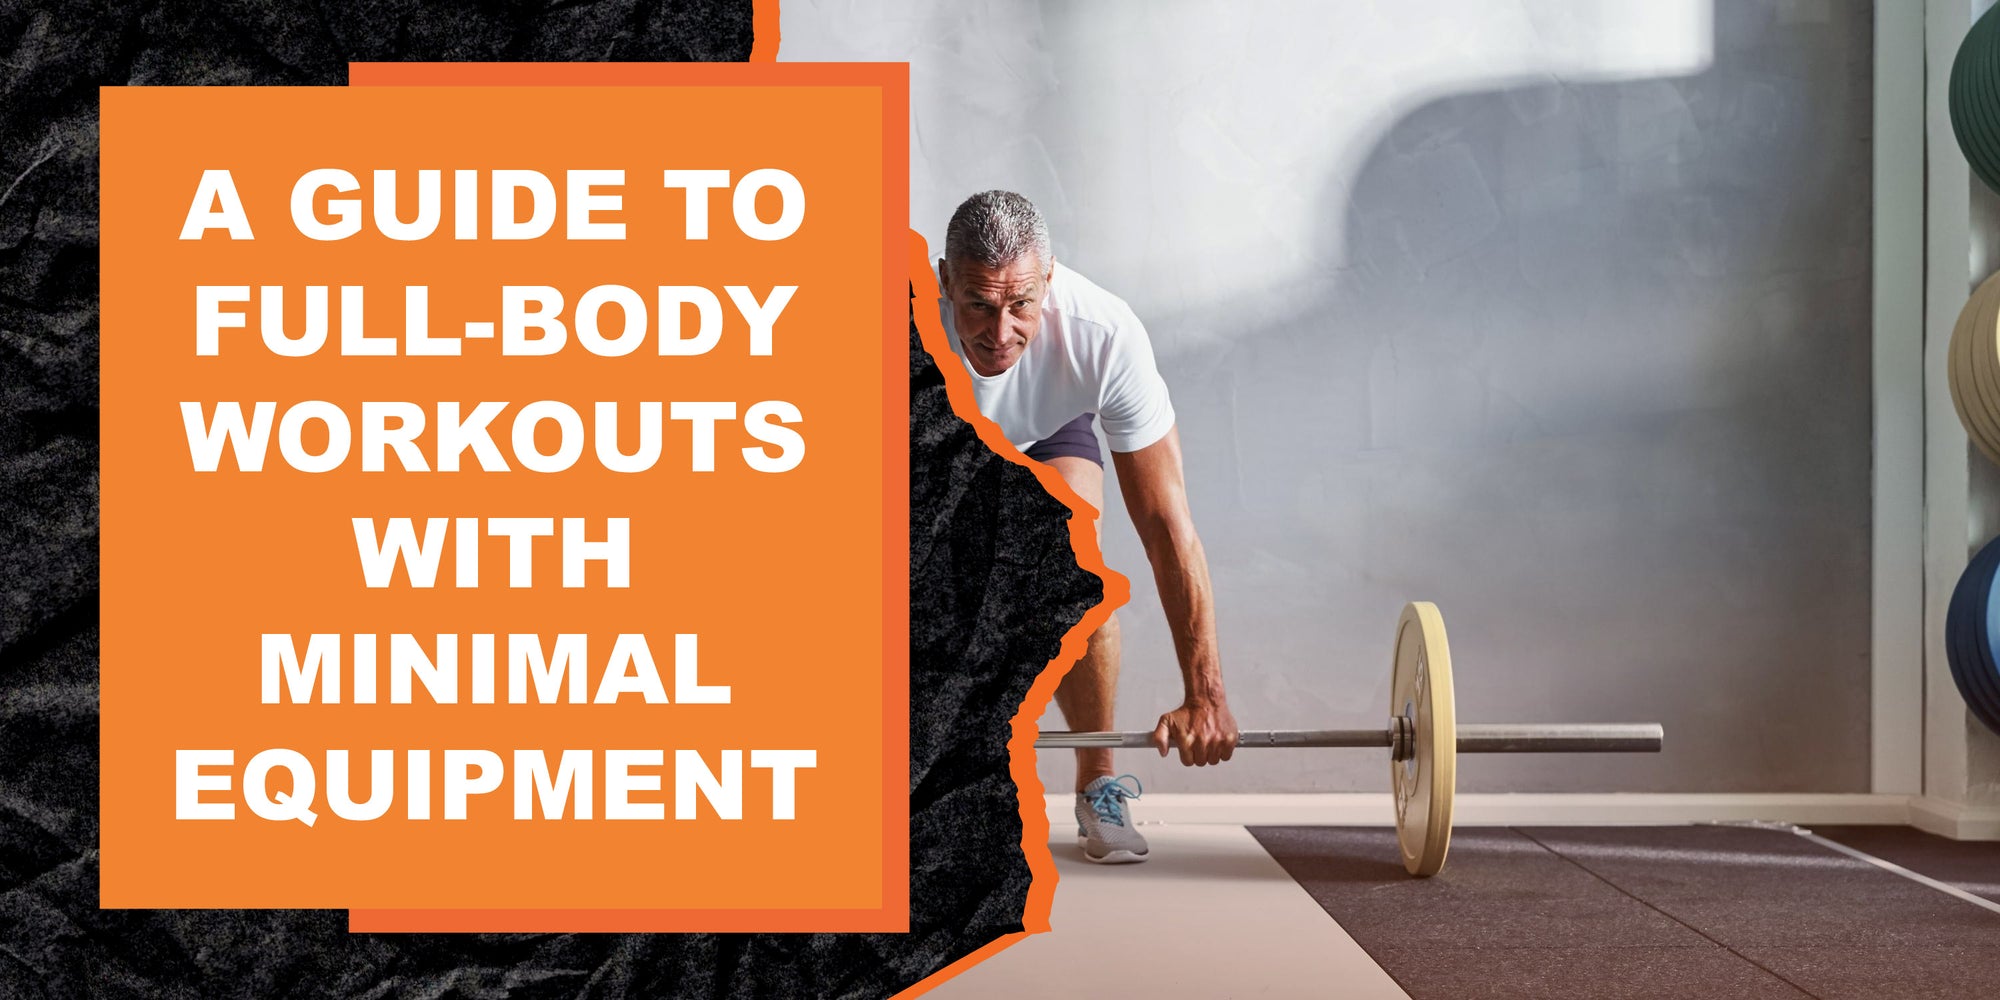 A Guide to Full-Body Workouts with Minimal Equipment